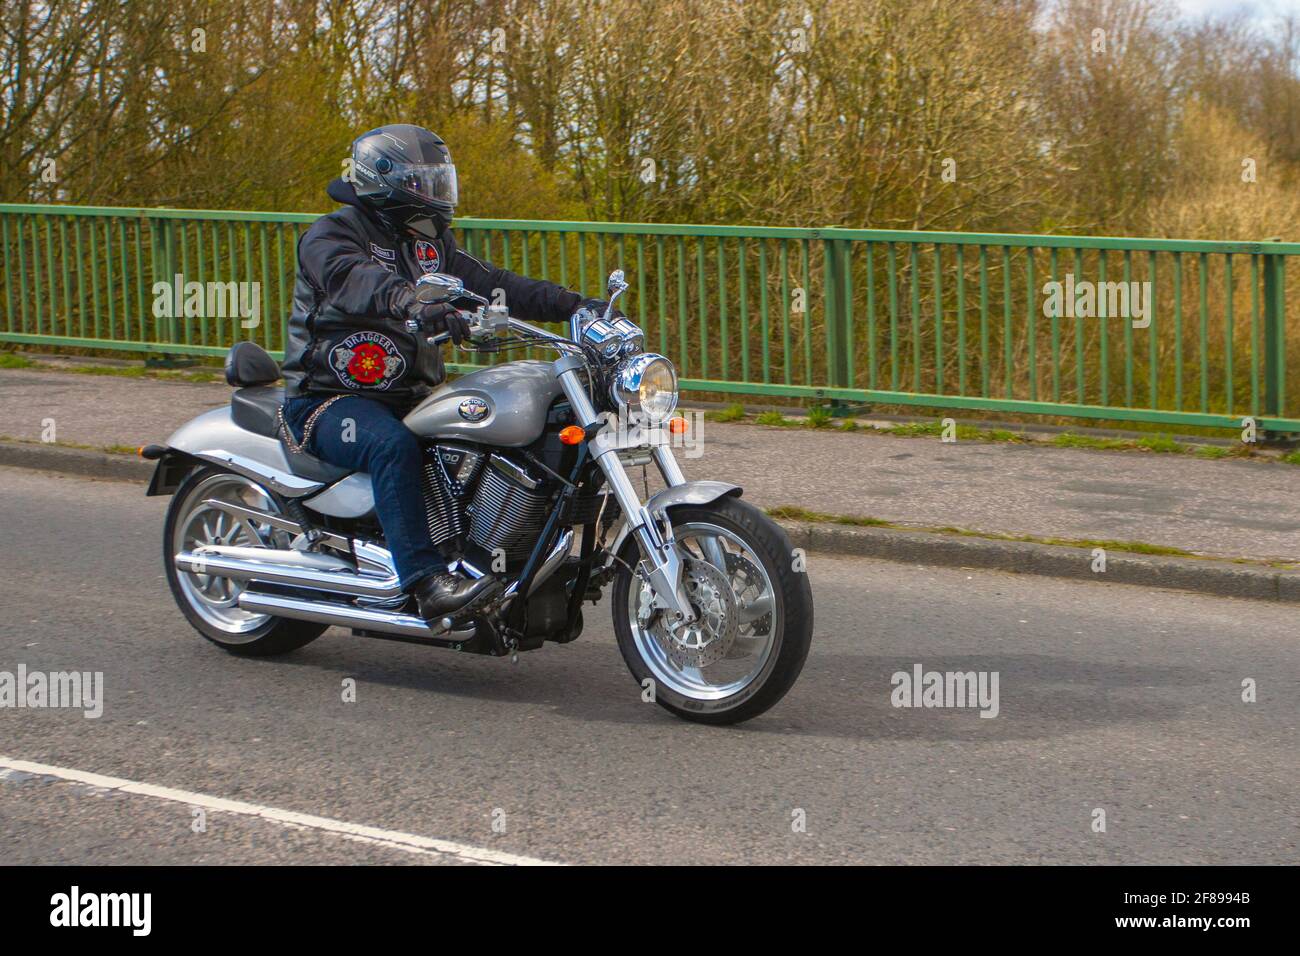 2007 Victory Hammer 1634cc Cruiser; Motorbike rider; two wheeled transport, motorcycles, vehicle on British roads, motorbikes, motorcycle bike riders motoring in Manchester, UK Stock Photo